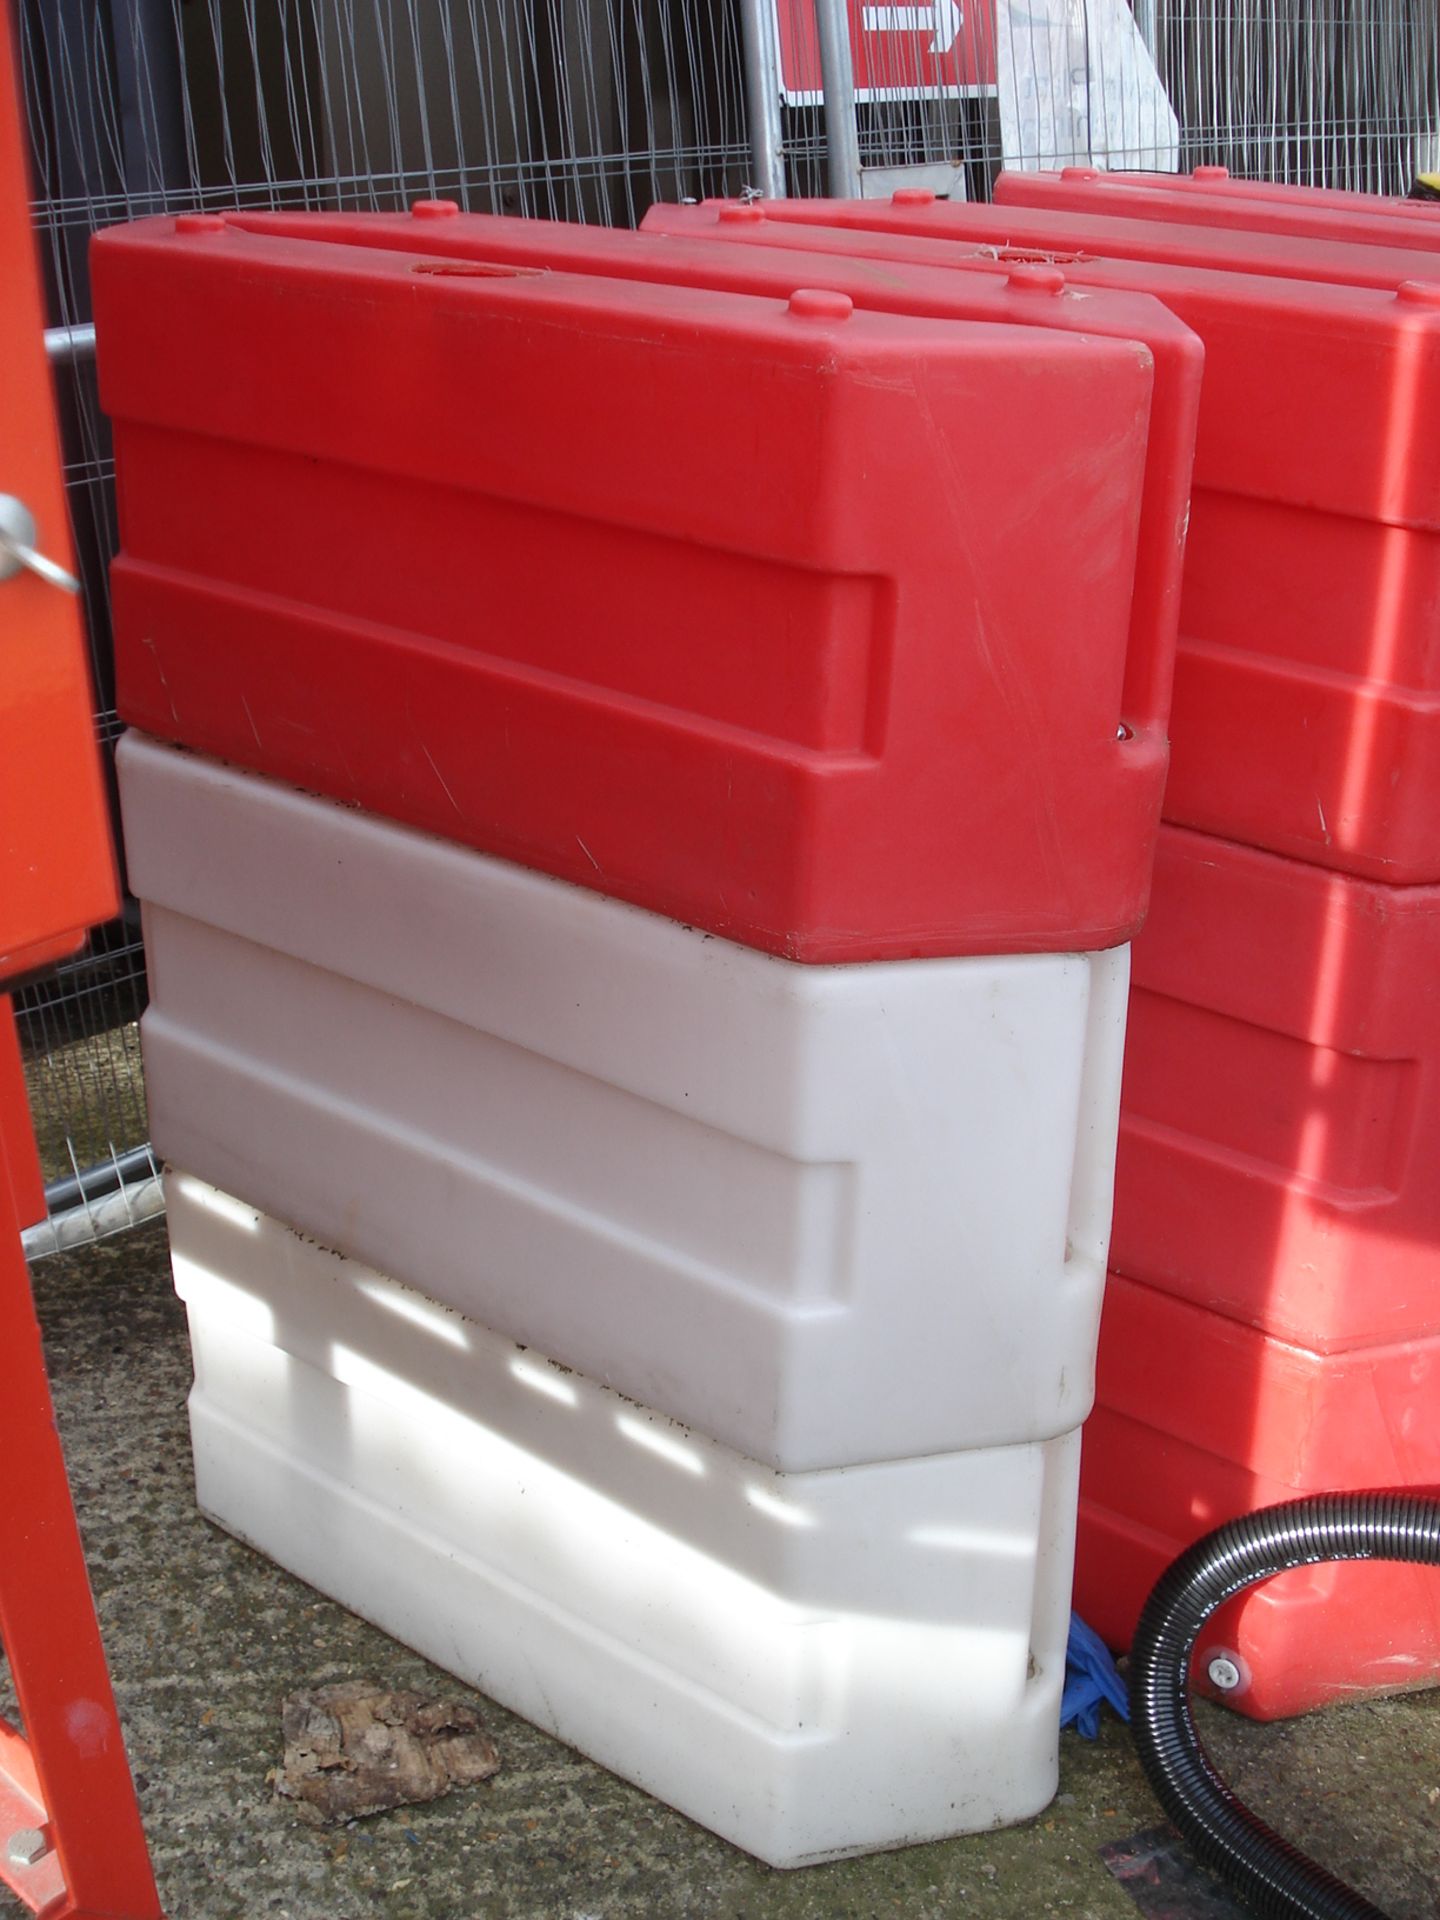 Red/White Plastic Pedestrian Safety Barriers x 20 - 37" Long x 15" Wide x 16" High